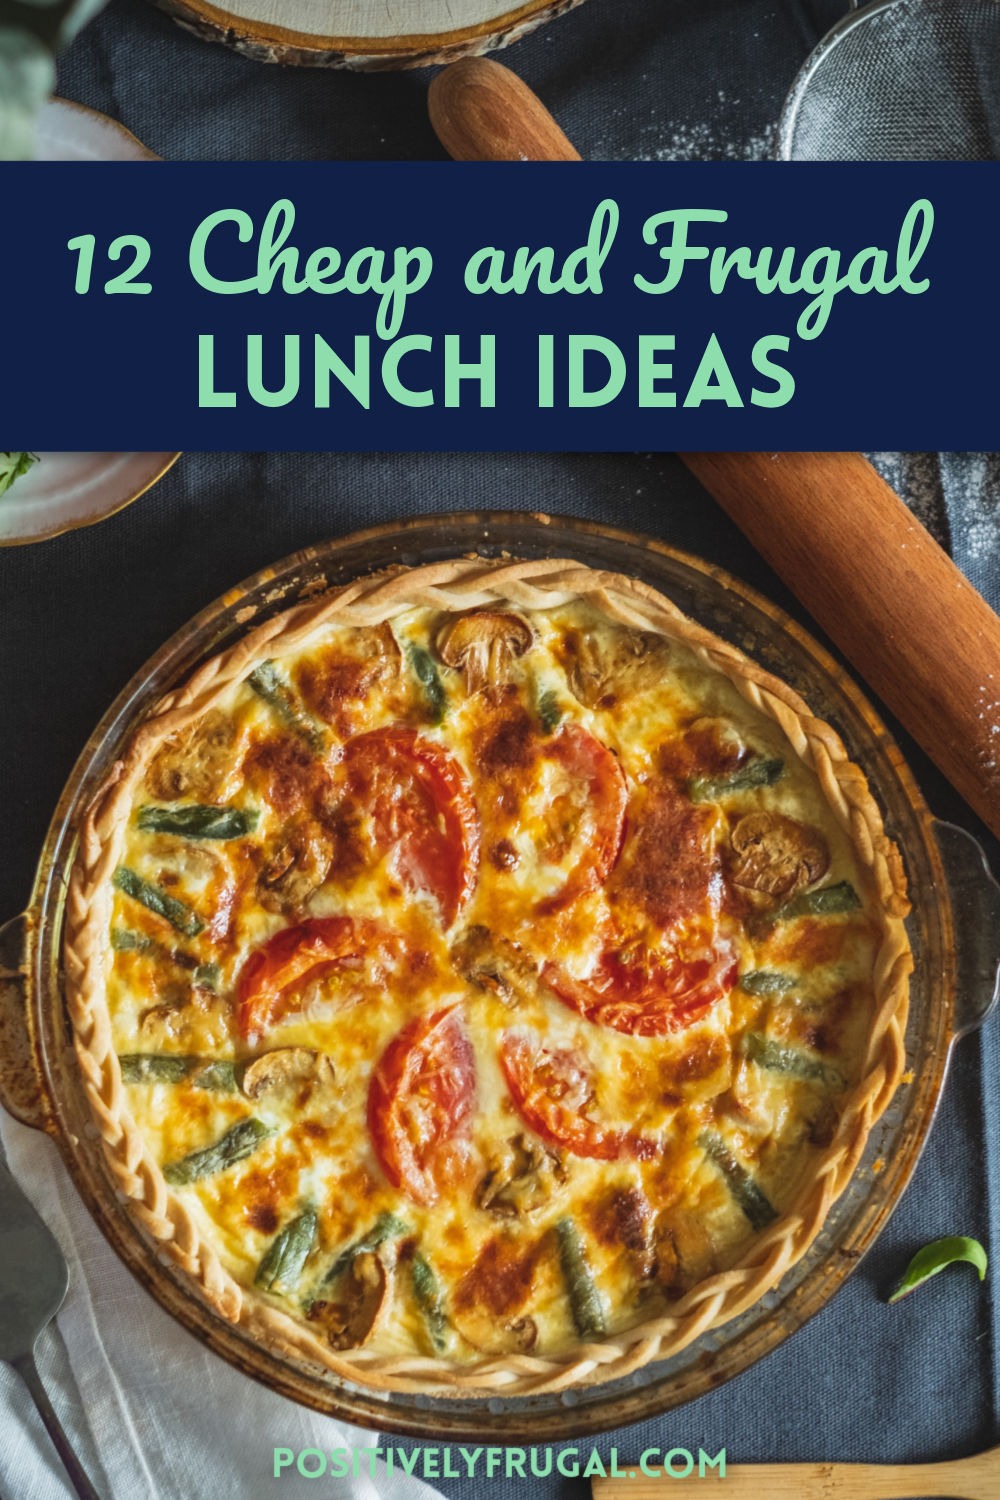 Cheap and Frugal Lunch Ideas by PositivelyFrugal.com